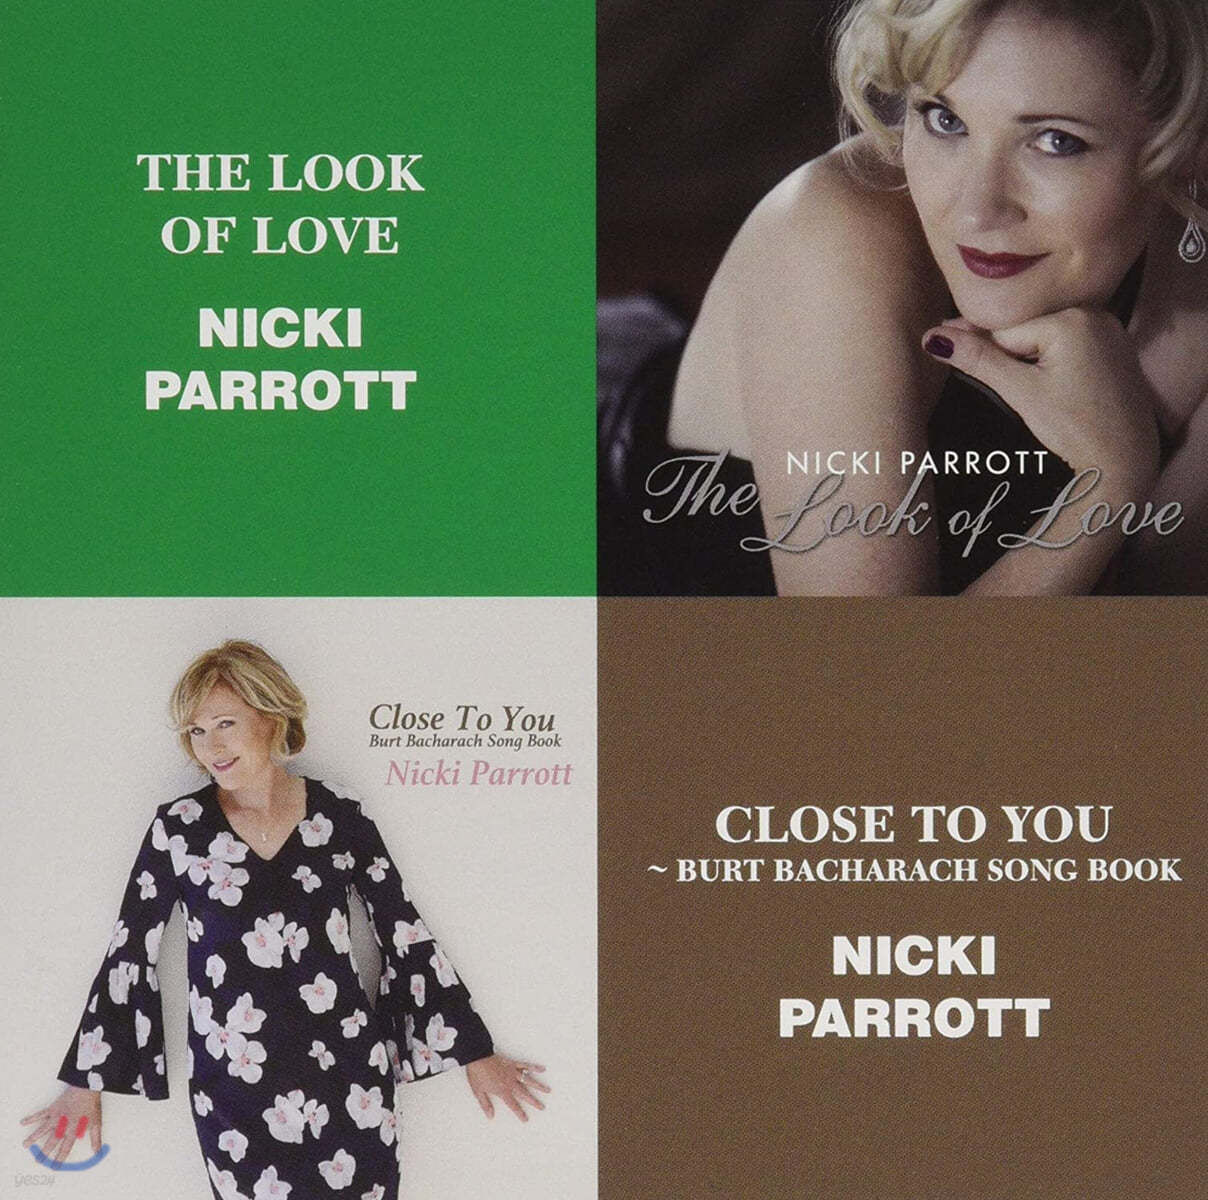 Nicki Parrott (니키 패럿) - The Look Of Love + Close To You 